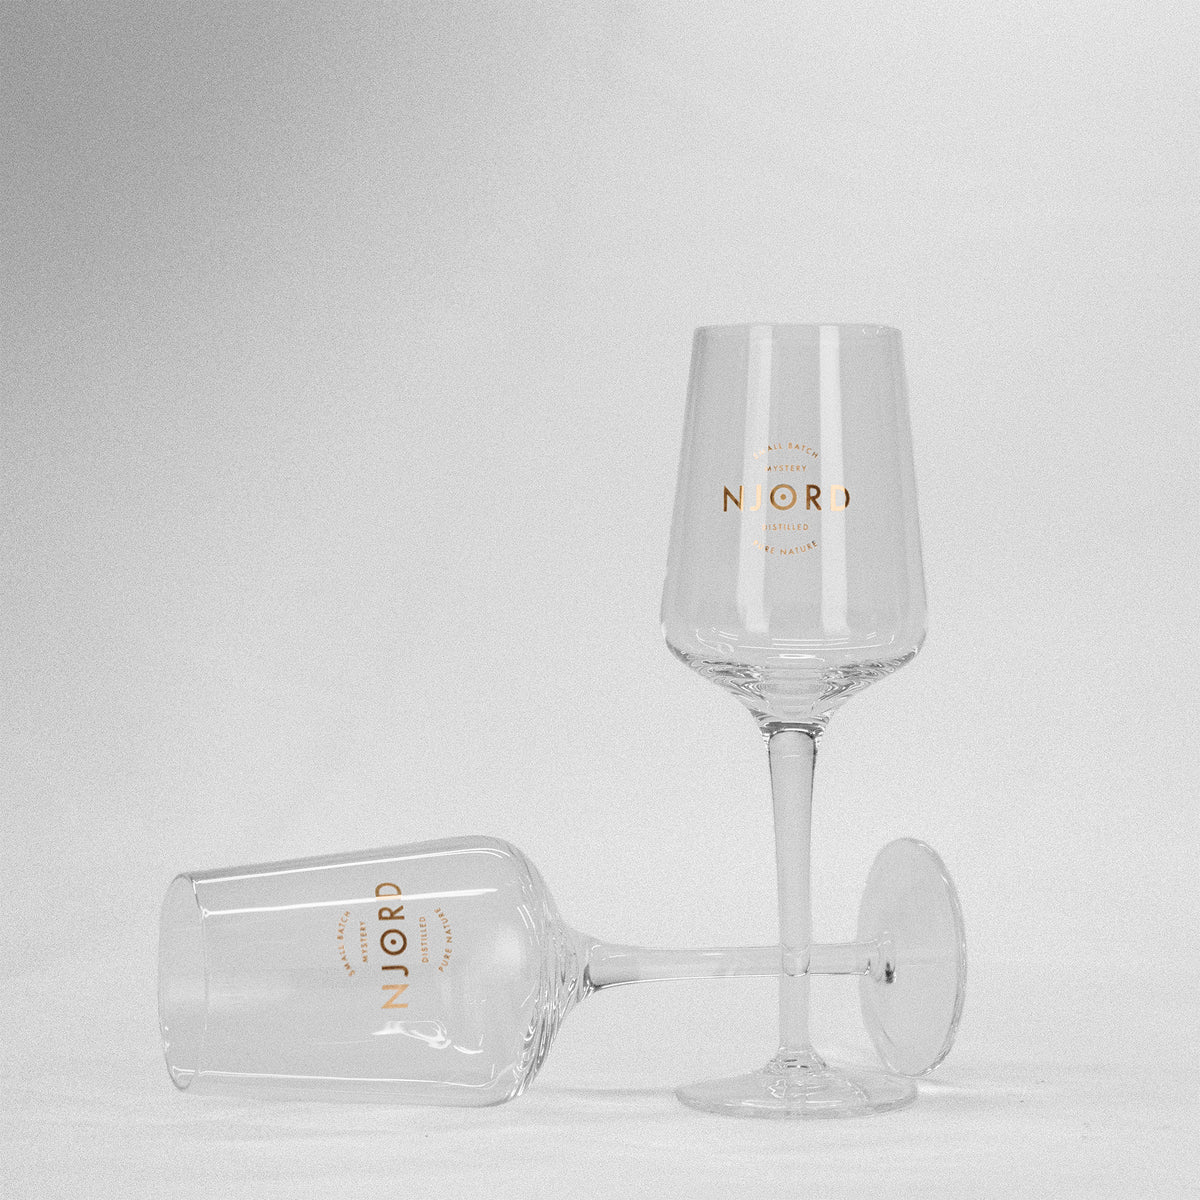 2 mouth-blown crystal tasting glasses with Njord logo